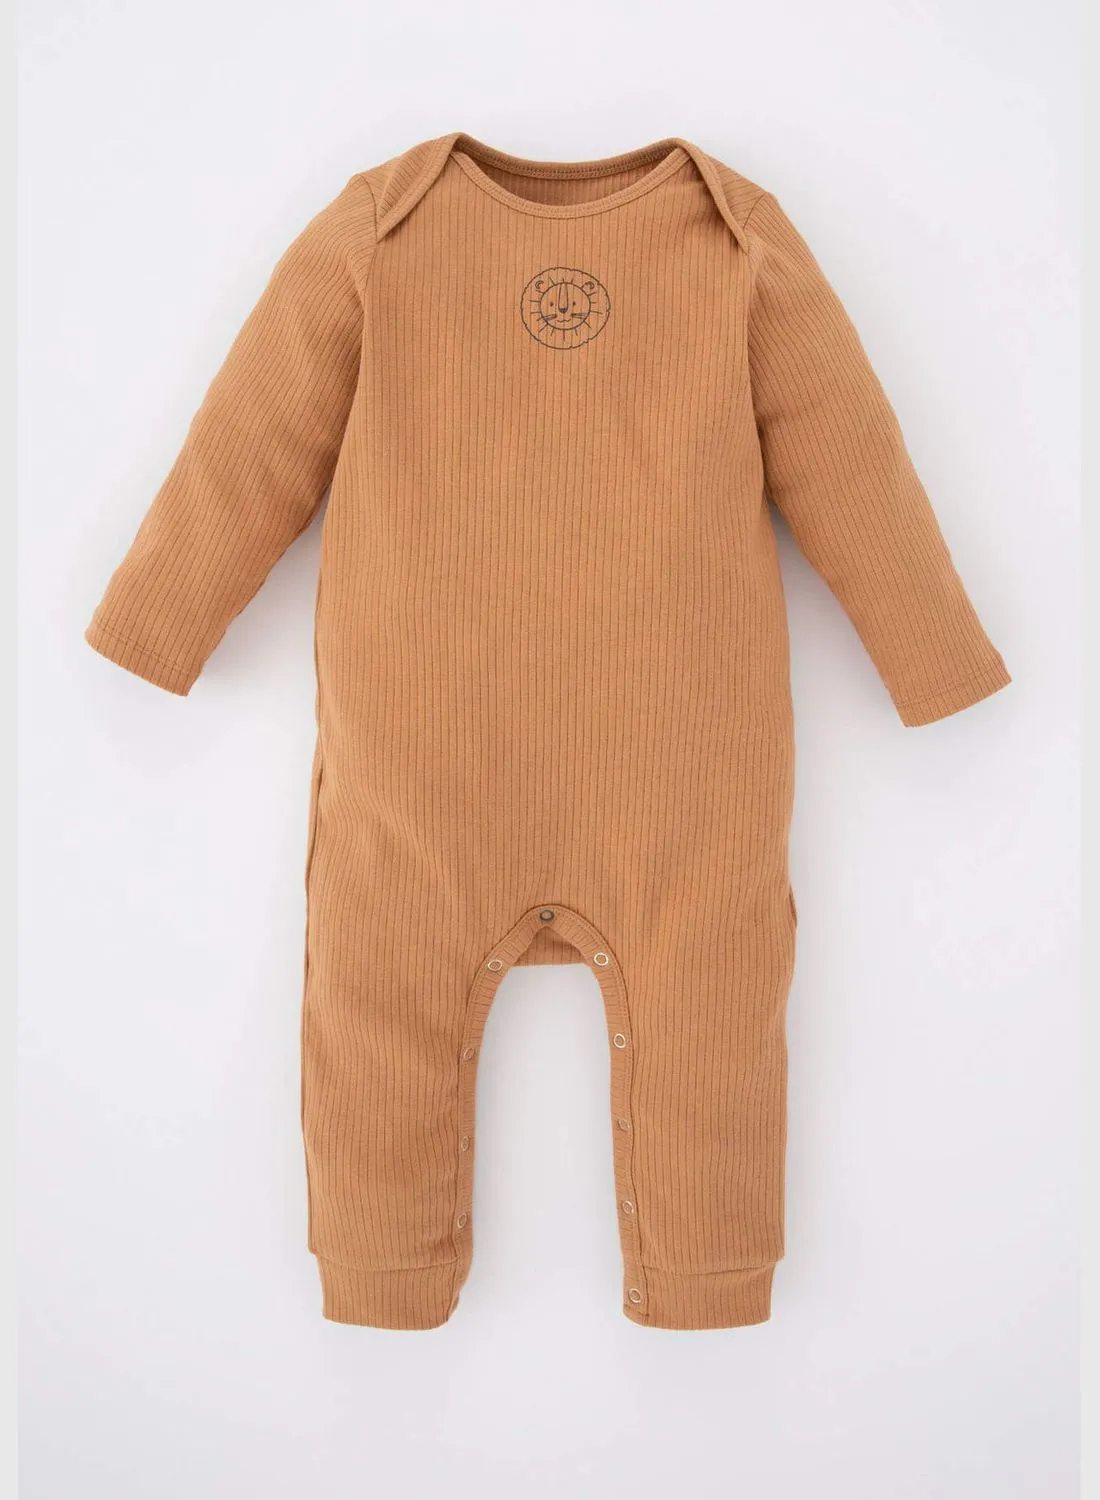 DeFacto BabyBoy Bike Neck Long Sleeve Knitted Overalls